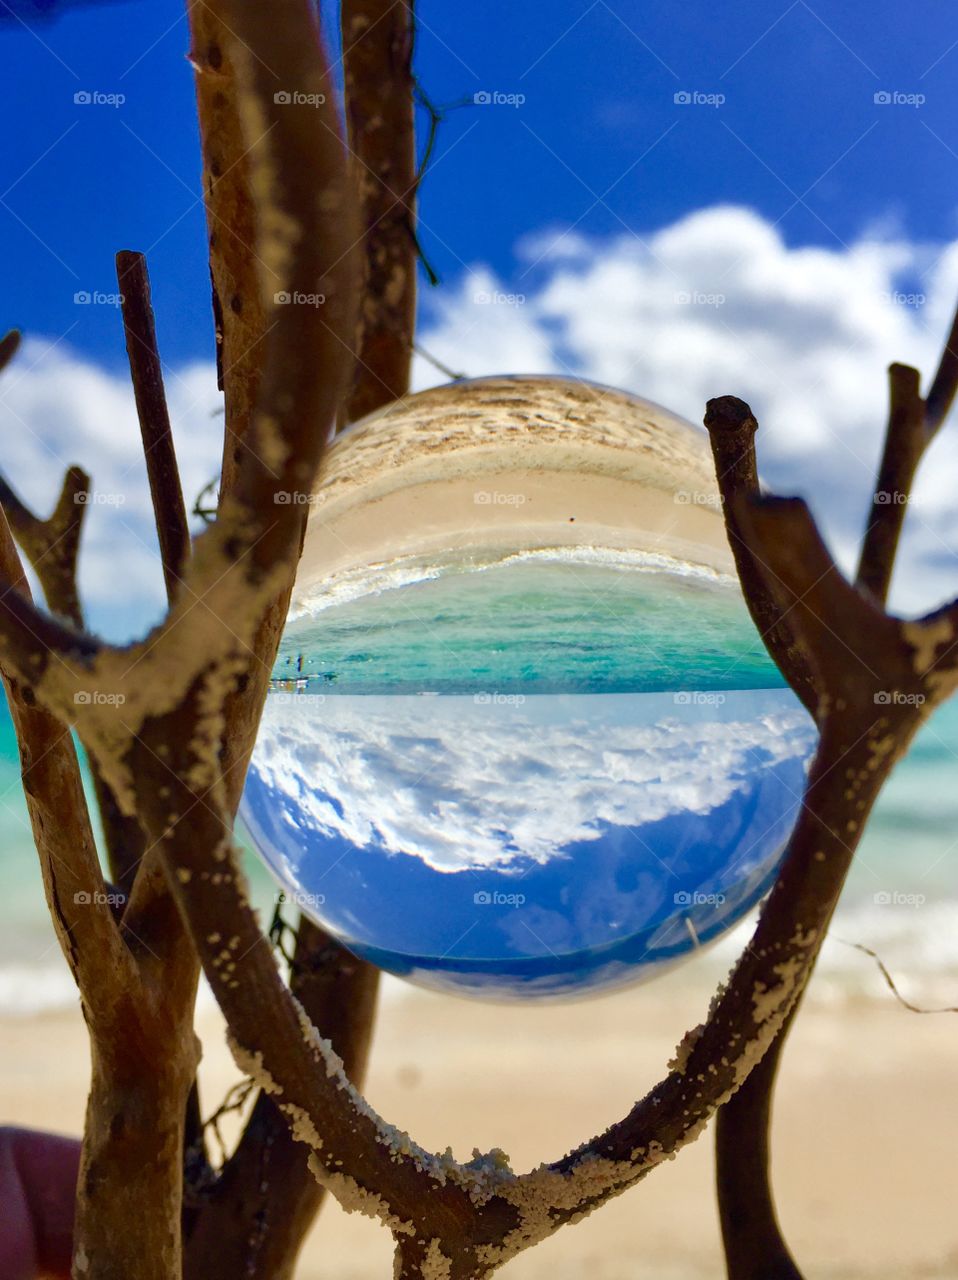 Sand, sea and sky in Freeport, Bahamas taken through a lensball creating an inverted image. 